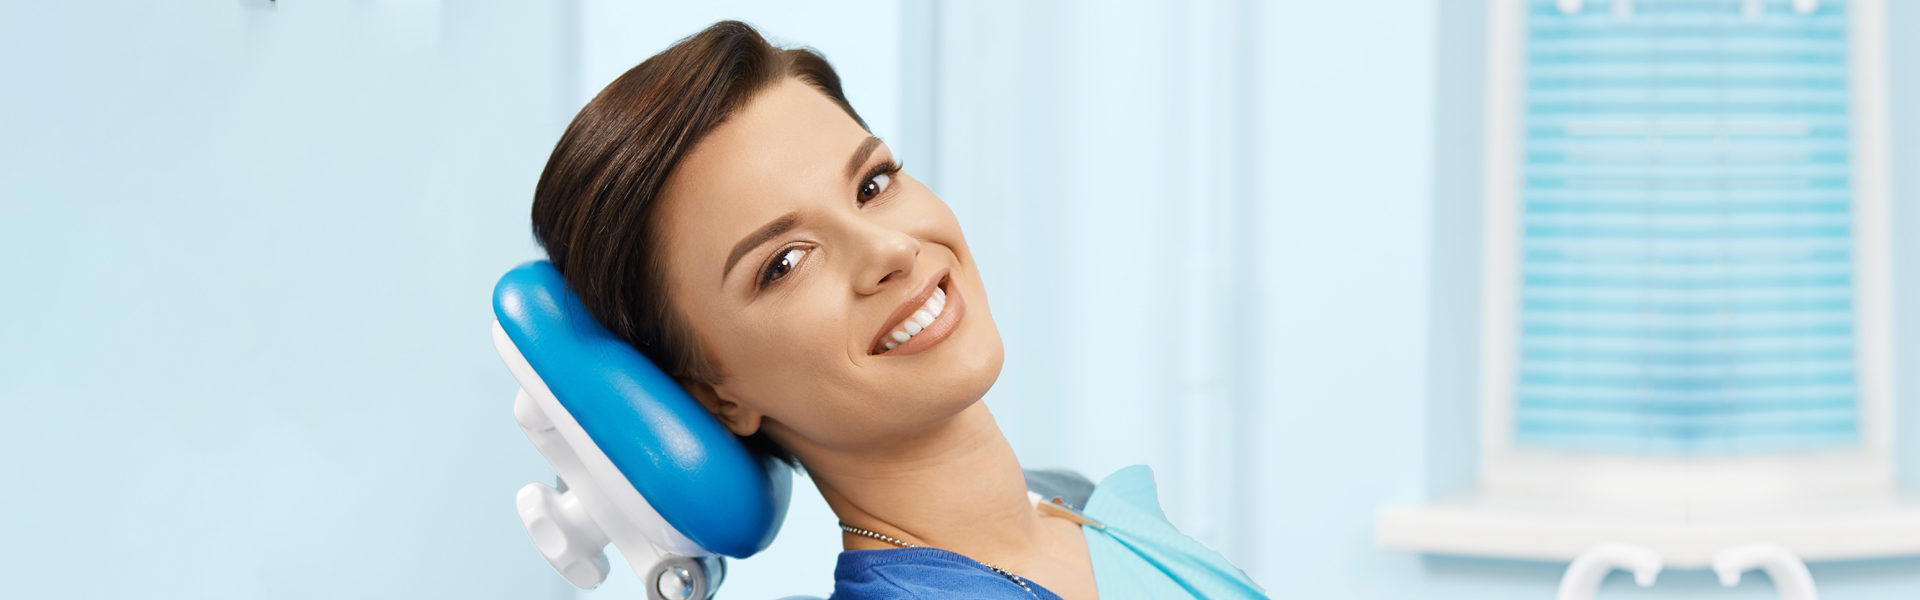 Dental Crowns in Knoxville, TN 